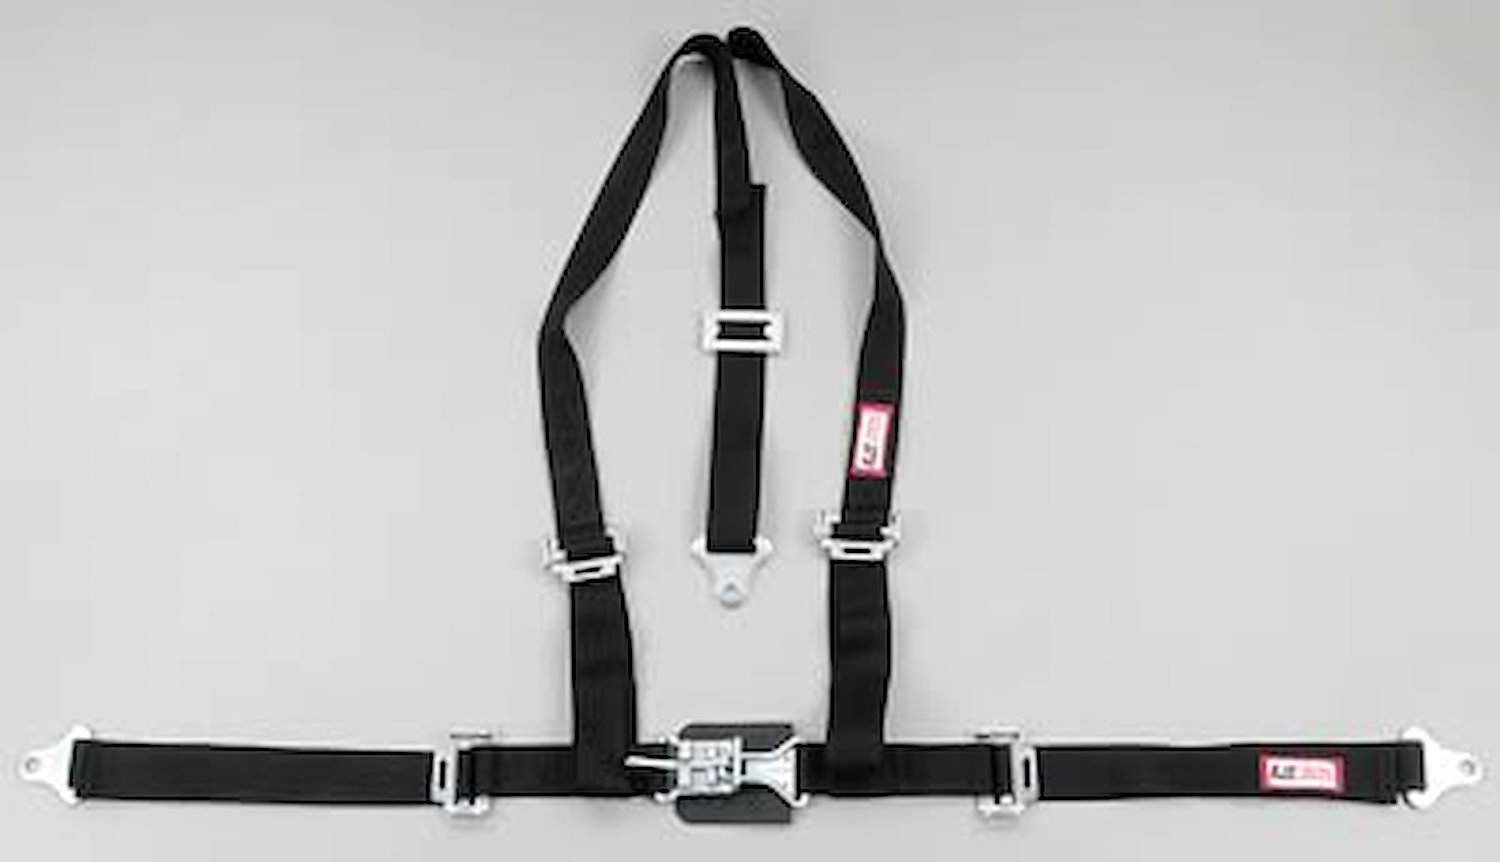 NON-SFI L&L HARNESS 2 PULL DOWN Lap Belt SNAP SEWN IN 2 S.H. Y FLOOR Mount w/STERNUM STRAP WRAP/SNAP RED